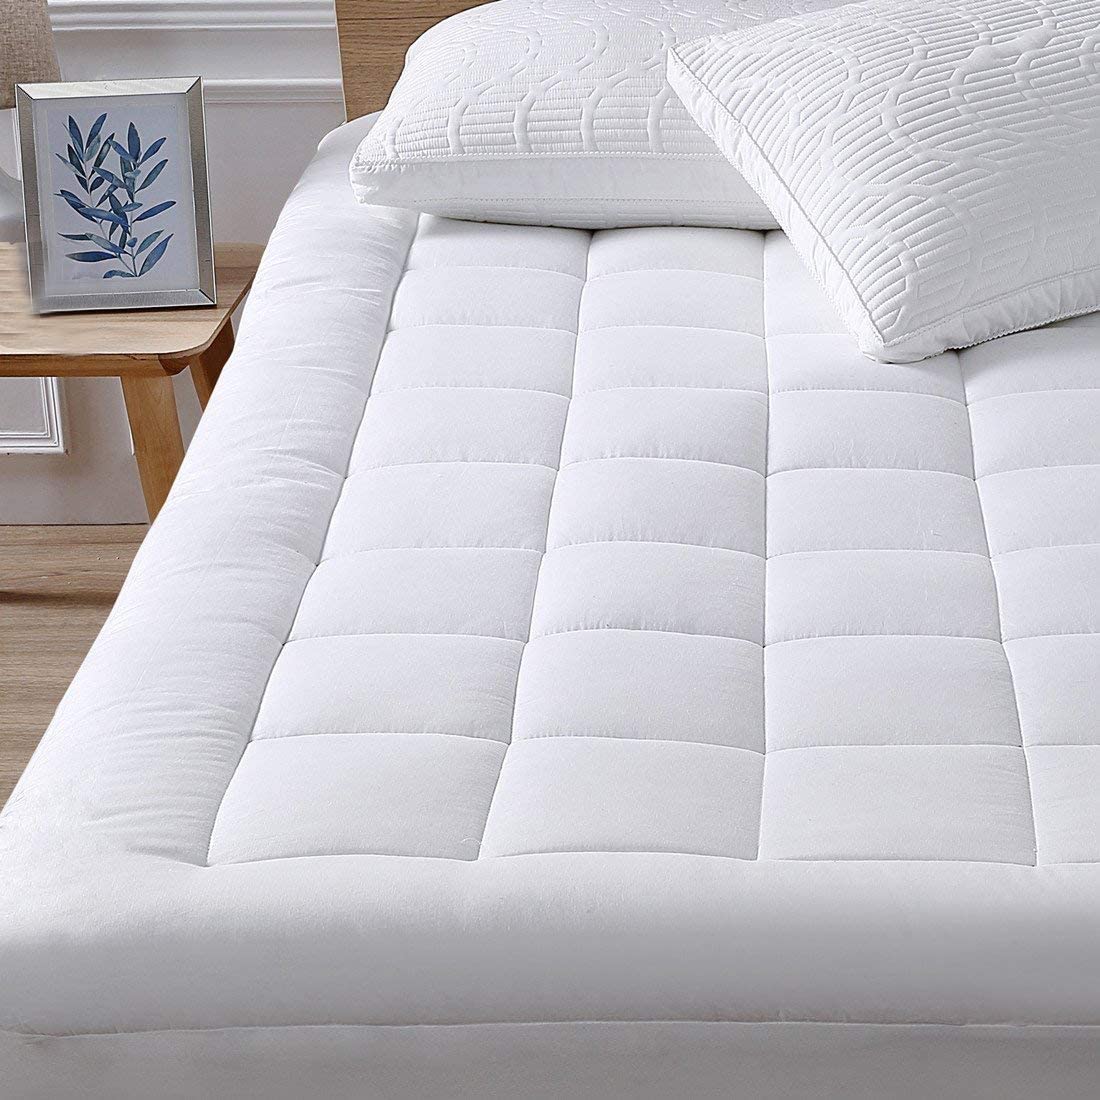 Memory Foam Mattress Topper Cooling Bed Pad Cover Pillow Top Soft 3-Inch Thick 